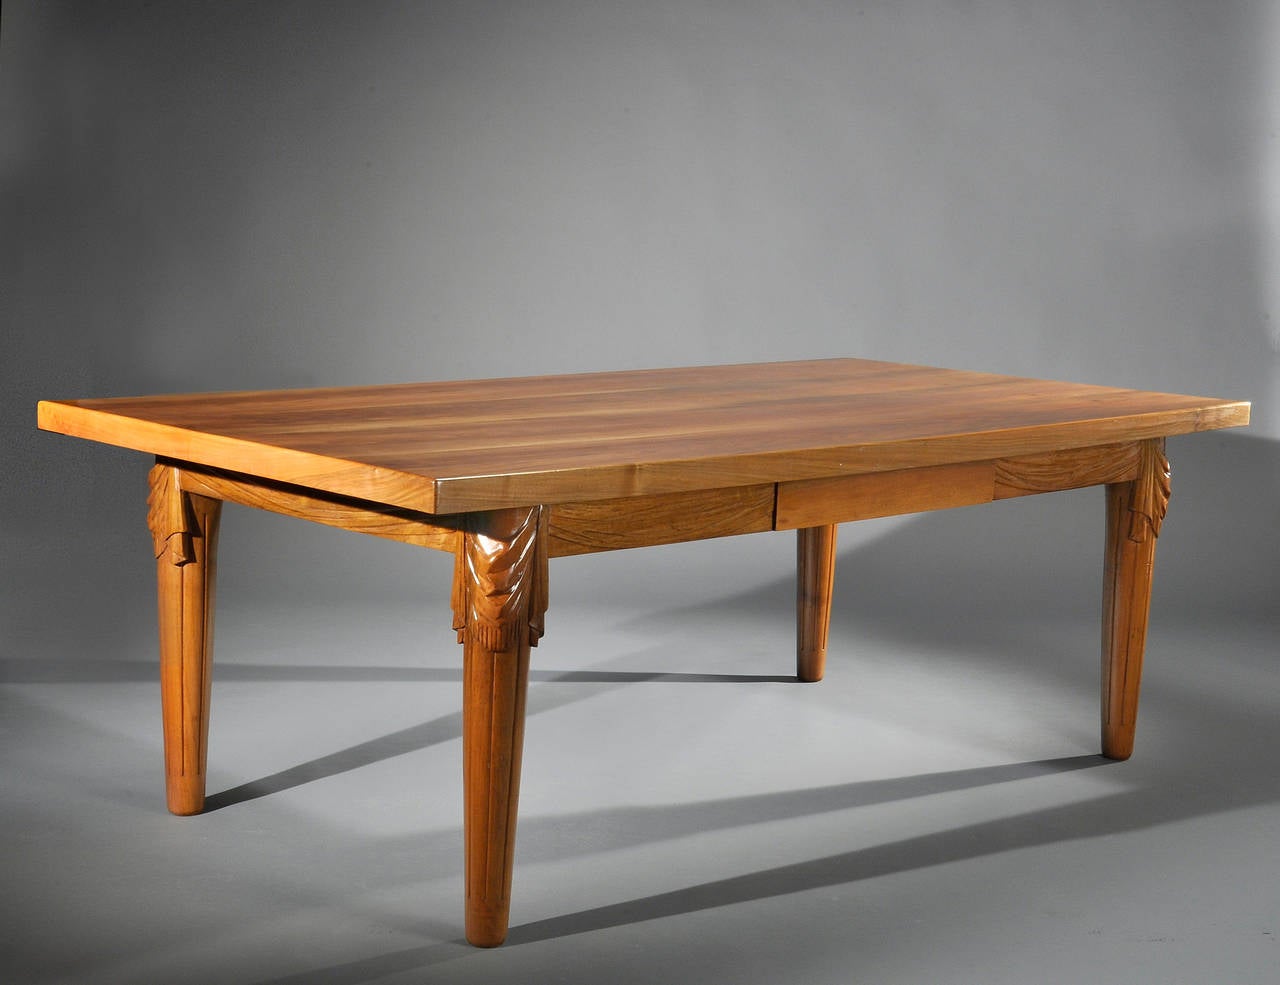 Gustave Louis Jaulmes walnut dining table, circa 1925.
The table is perfectly re-varnished. One drawer in the middle of the table.
Documented in 